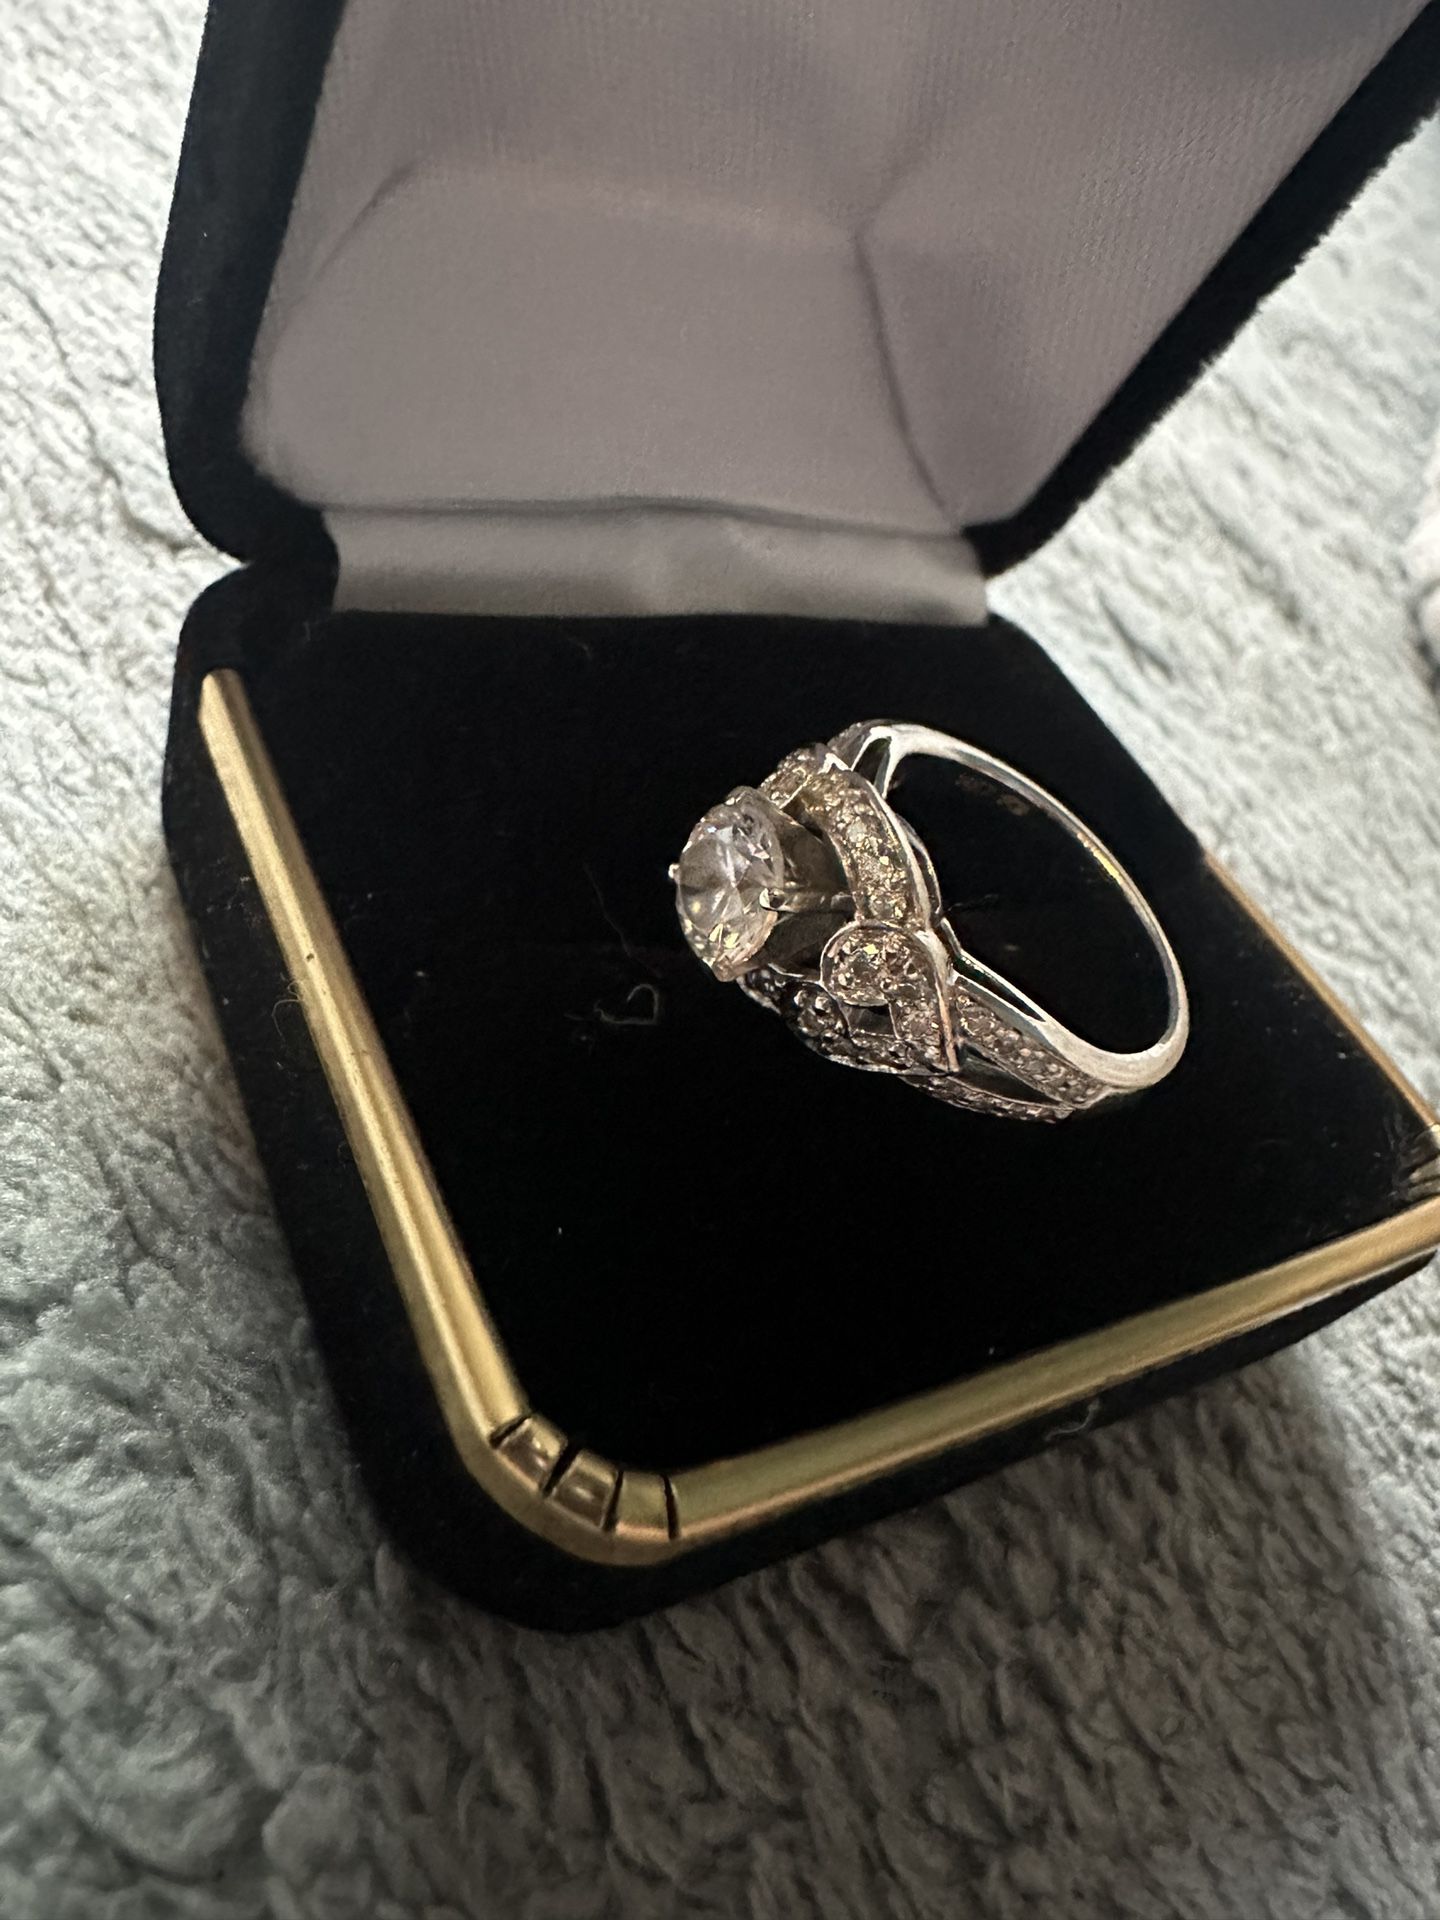 Engagement Ring. 6 1/4 Size. 14k White Gold. Real Diamonds On The Band. CZ Main Stone